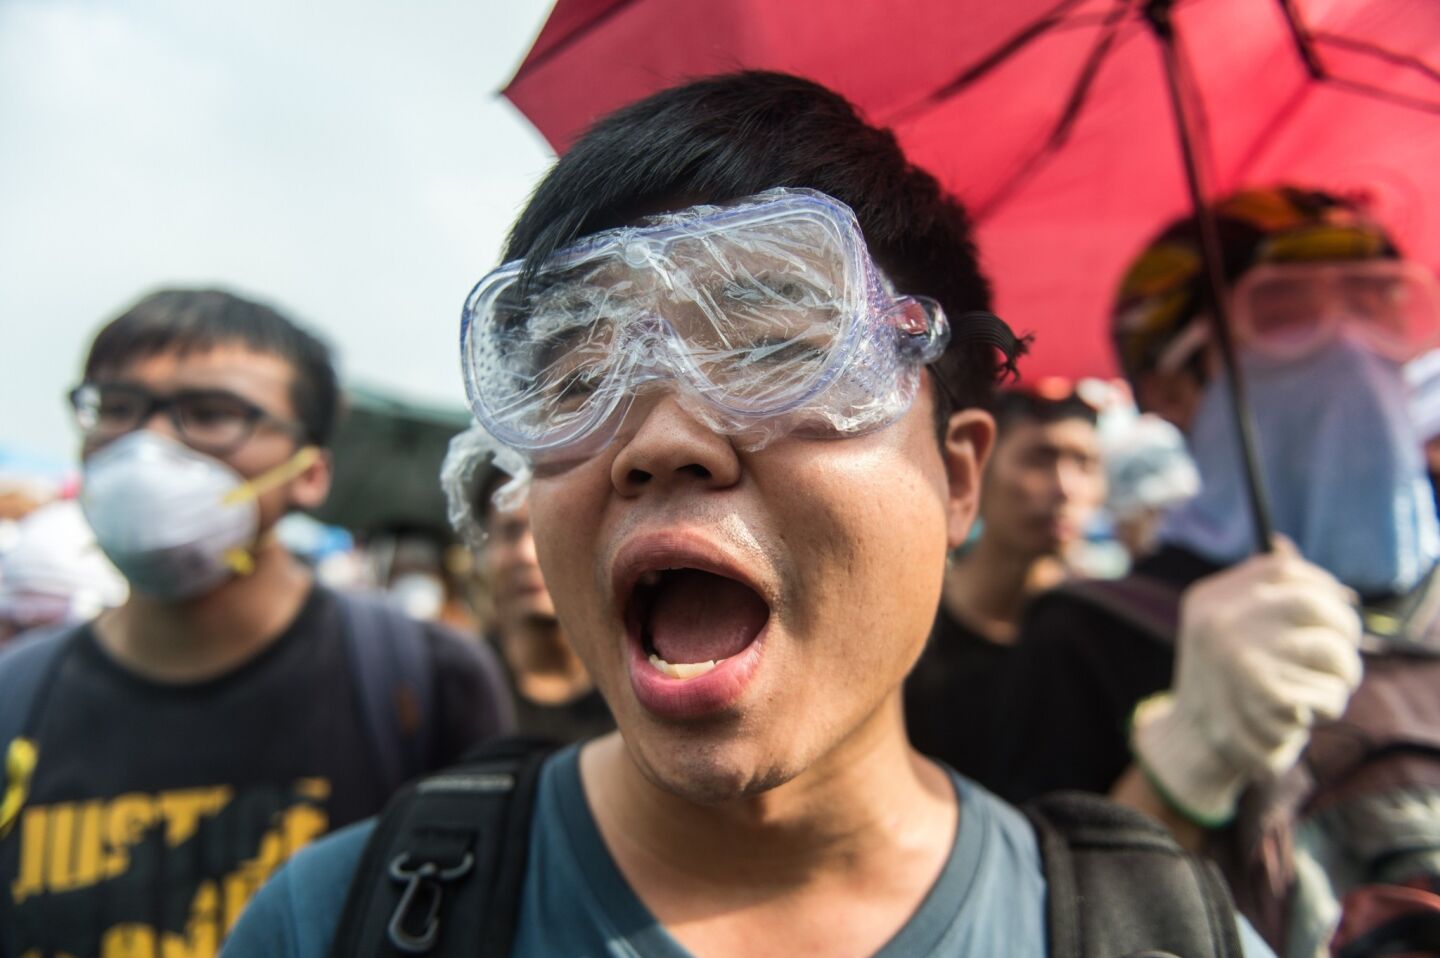 Protesters shout slogans at police outside the government headquarters in Hong Kong.